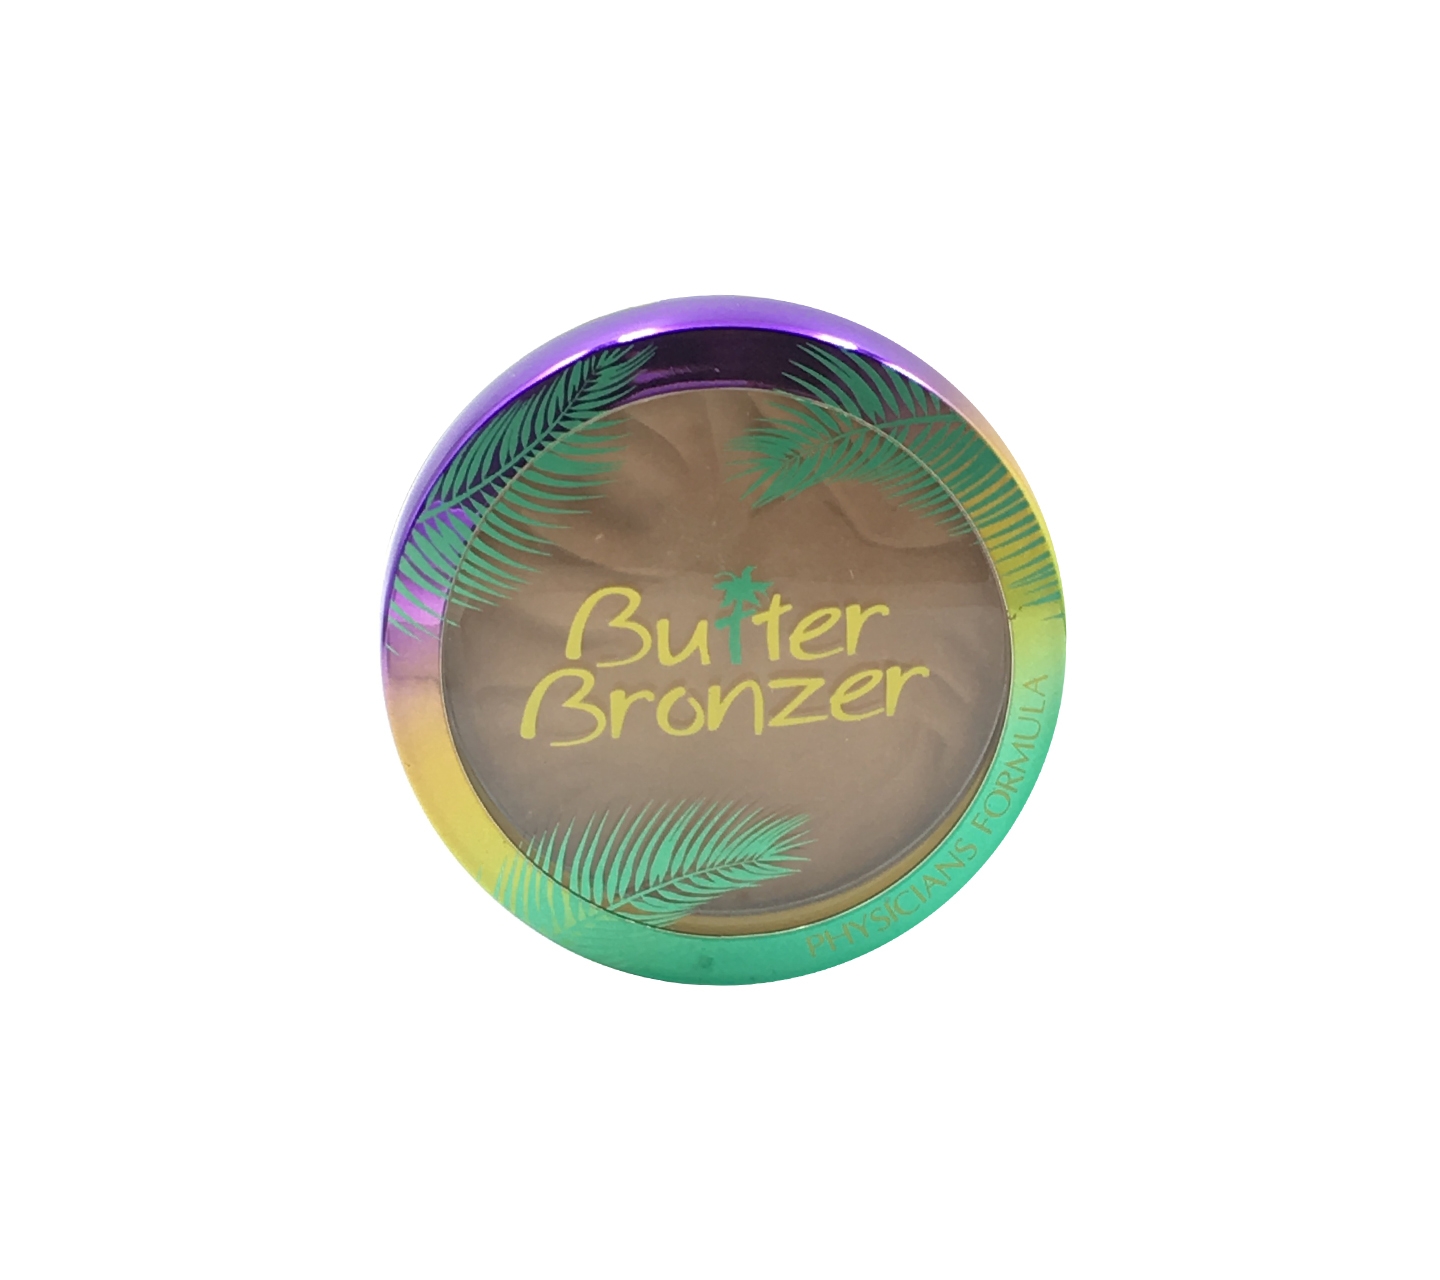 Physicians formula butter bronzer ultra-rich bronzer delivers a tropical glow